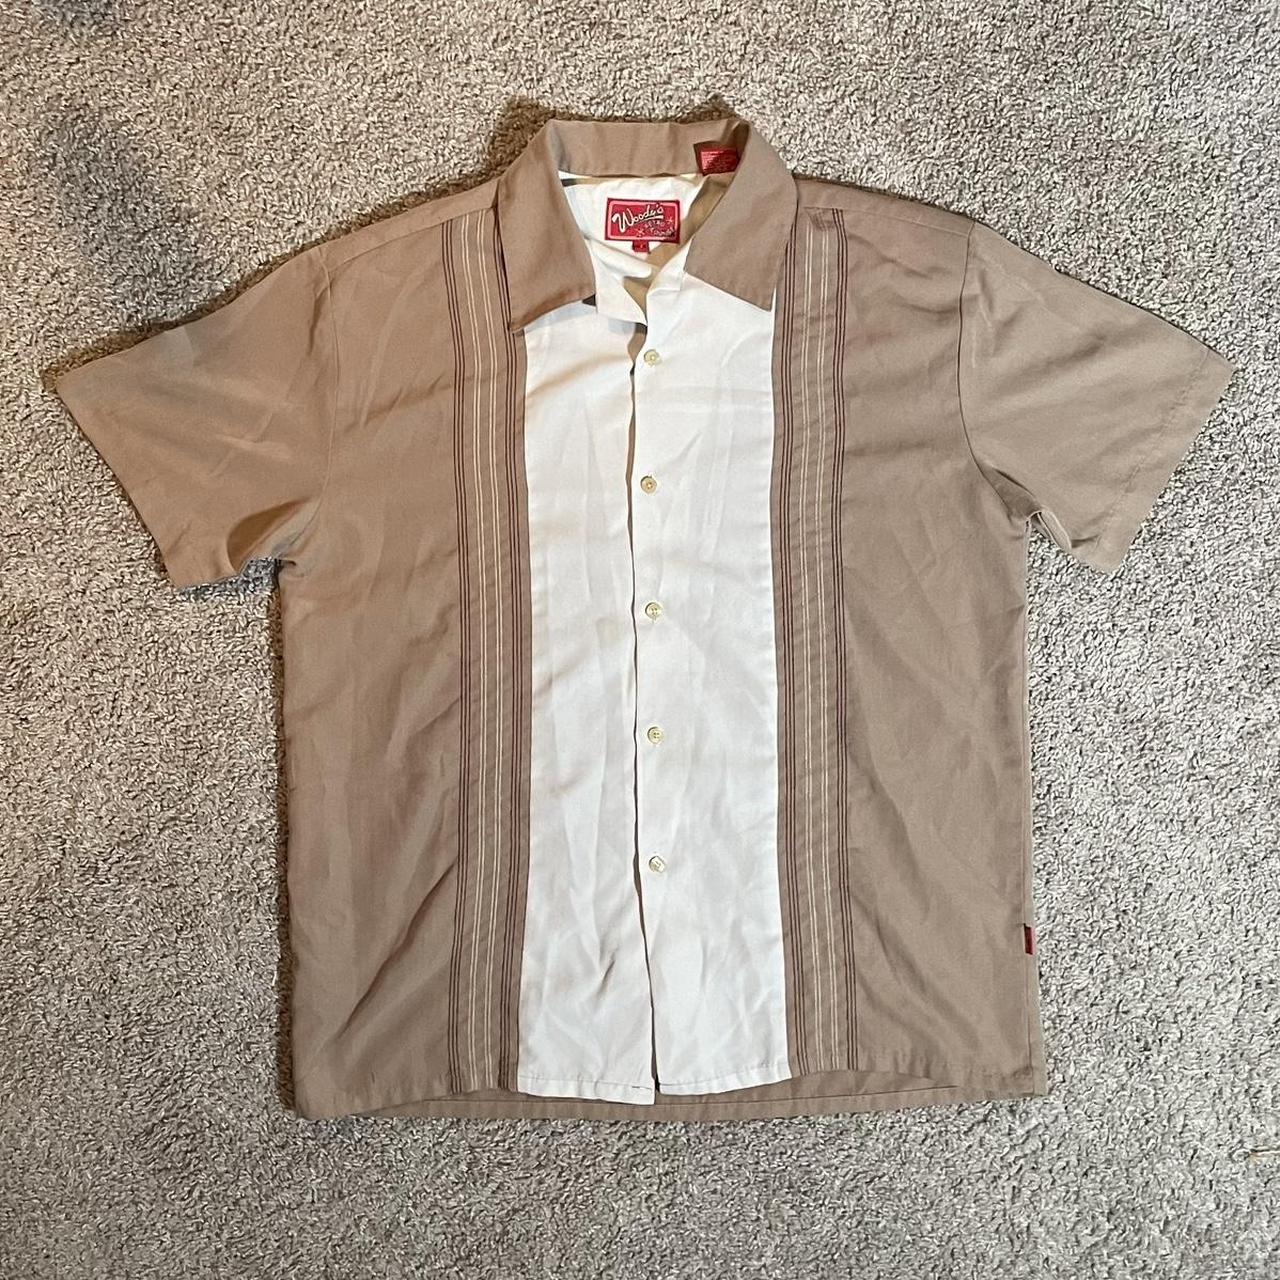 Bowling shirt from Woody’s Retro Lounge. Brand:... - Depop